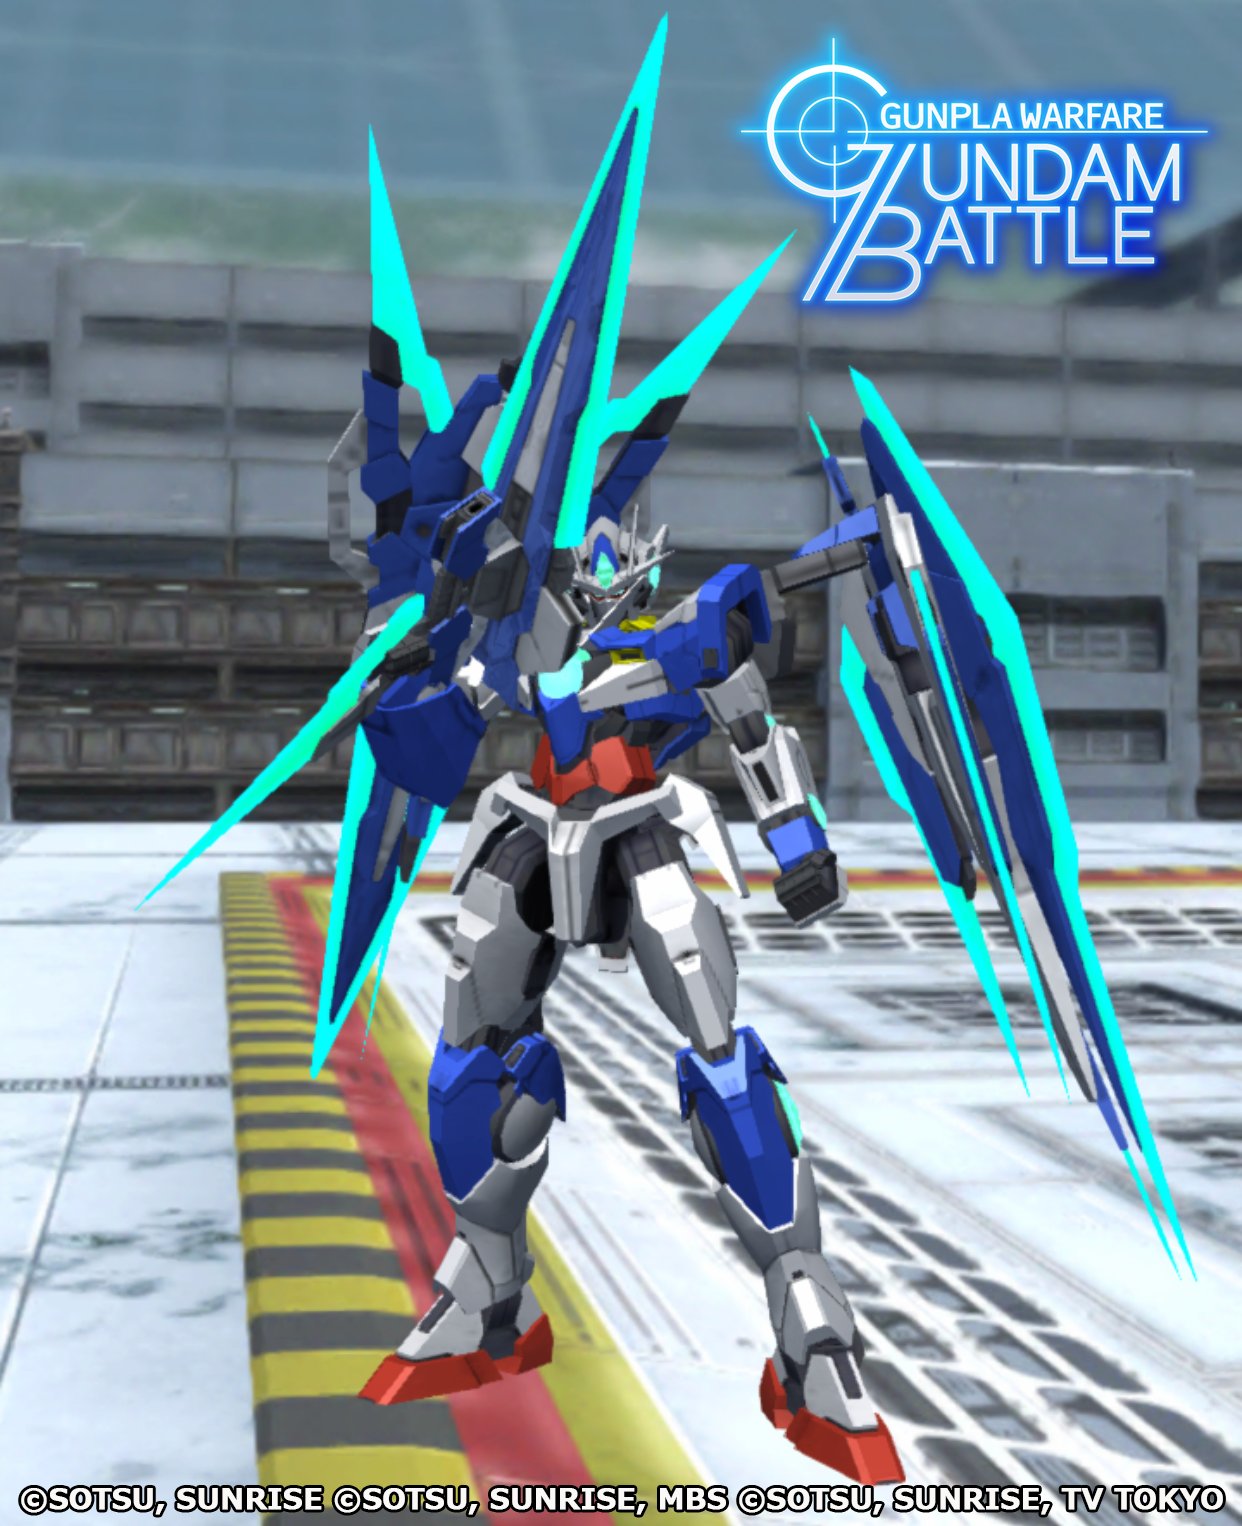 GUNDAM BREAKER MOBILE on Twitter: "Full Saber, Full Damage! The 00 Qan[T]  Full Saber has returned for a limited Time. It's time to stock up on some  powerful Melee weapons! https://t.co/PkoavNODbs" /